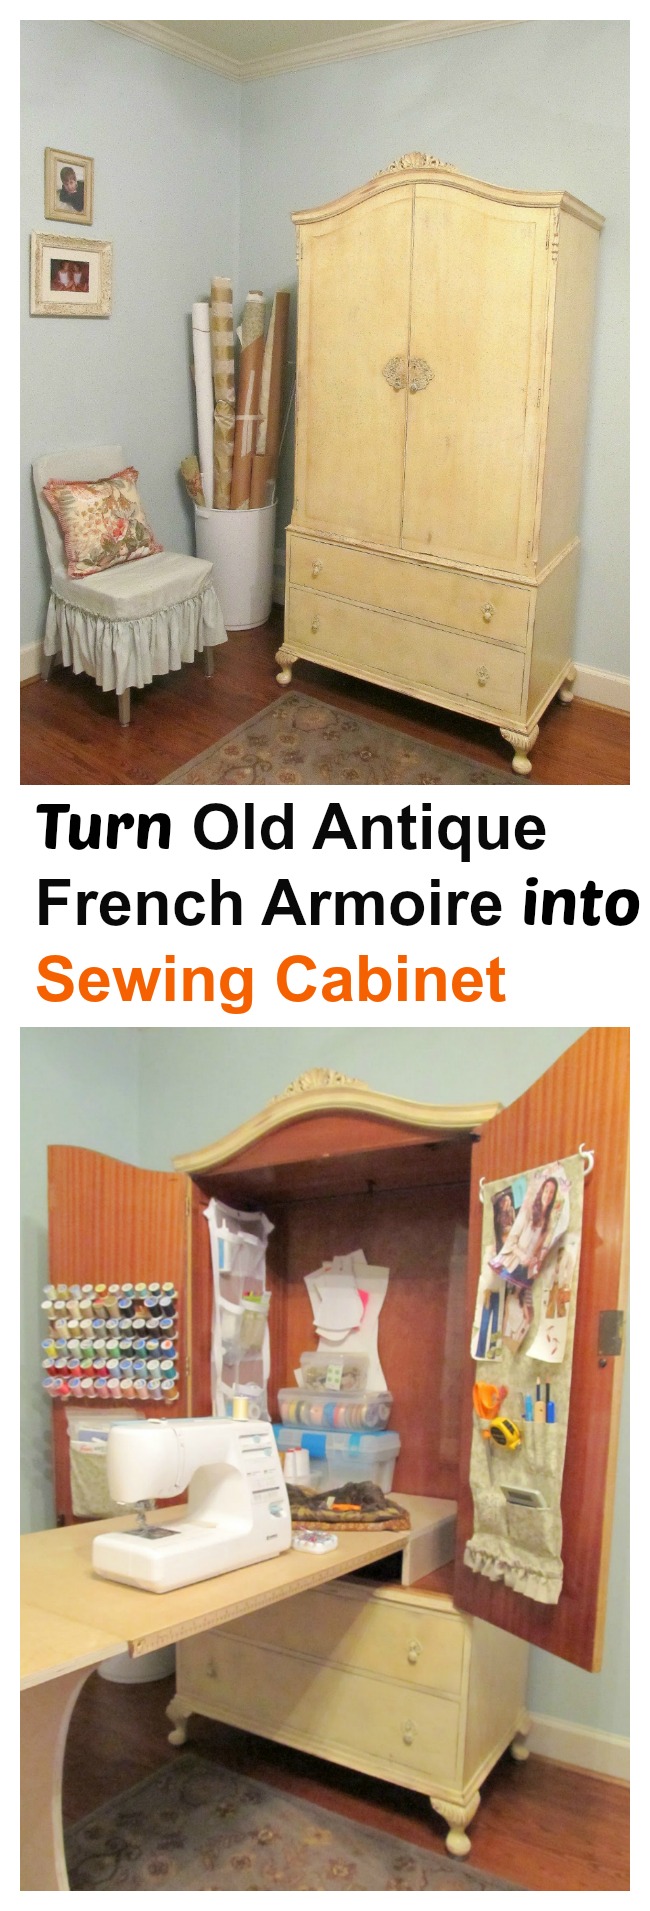 16 Upcycled Furniture Ideas to Give Old Furnitures New 